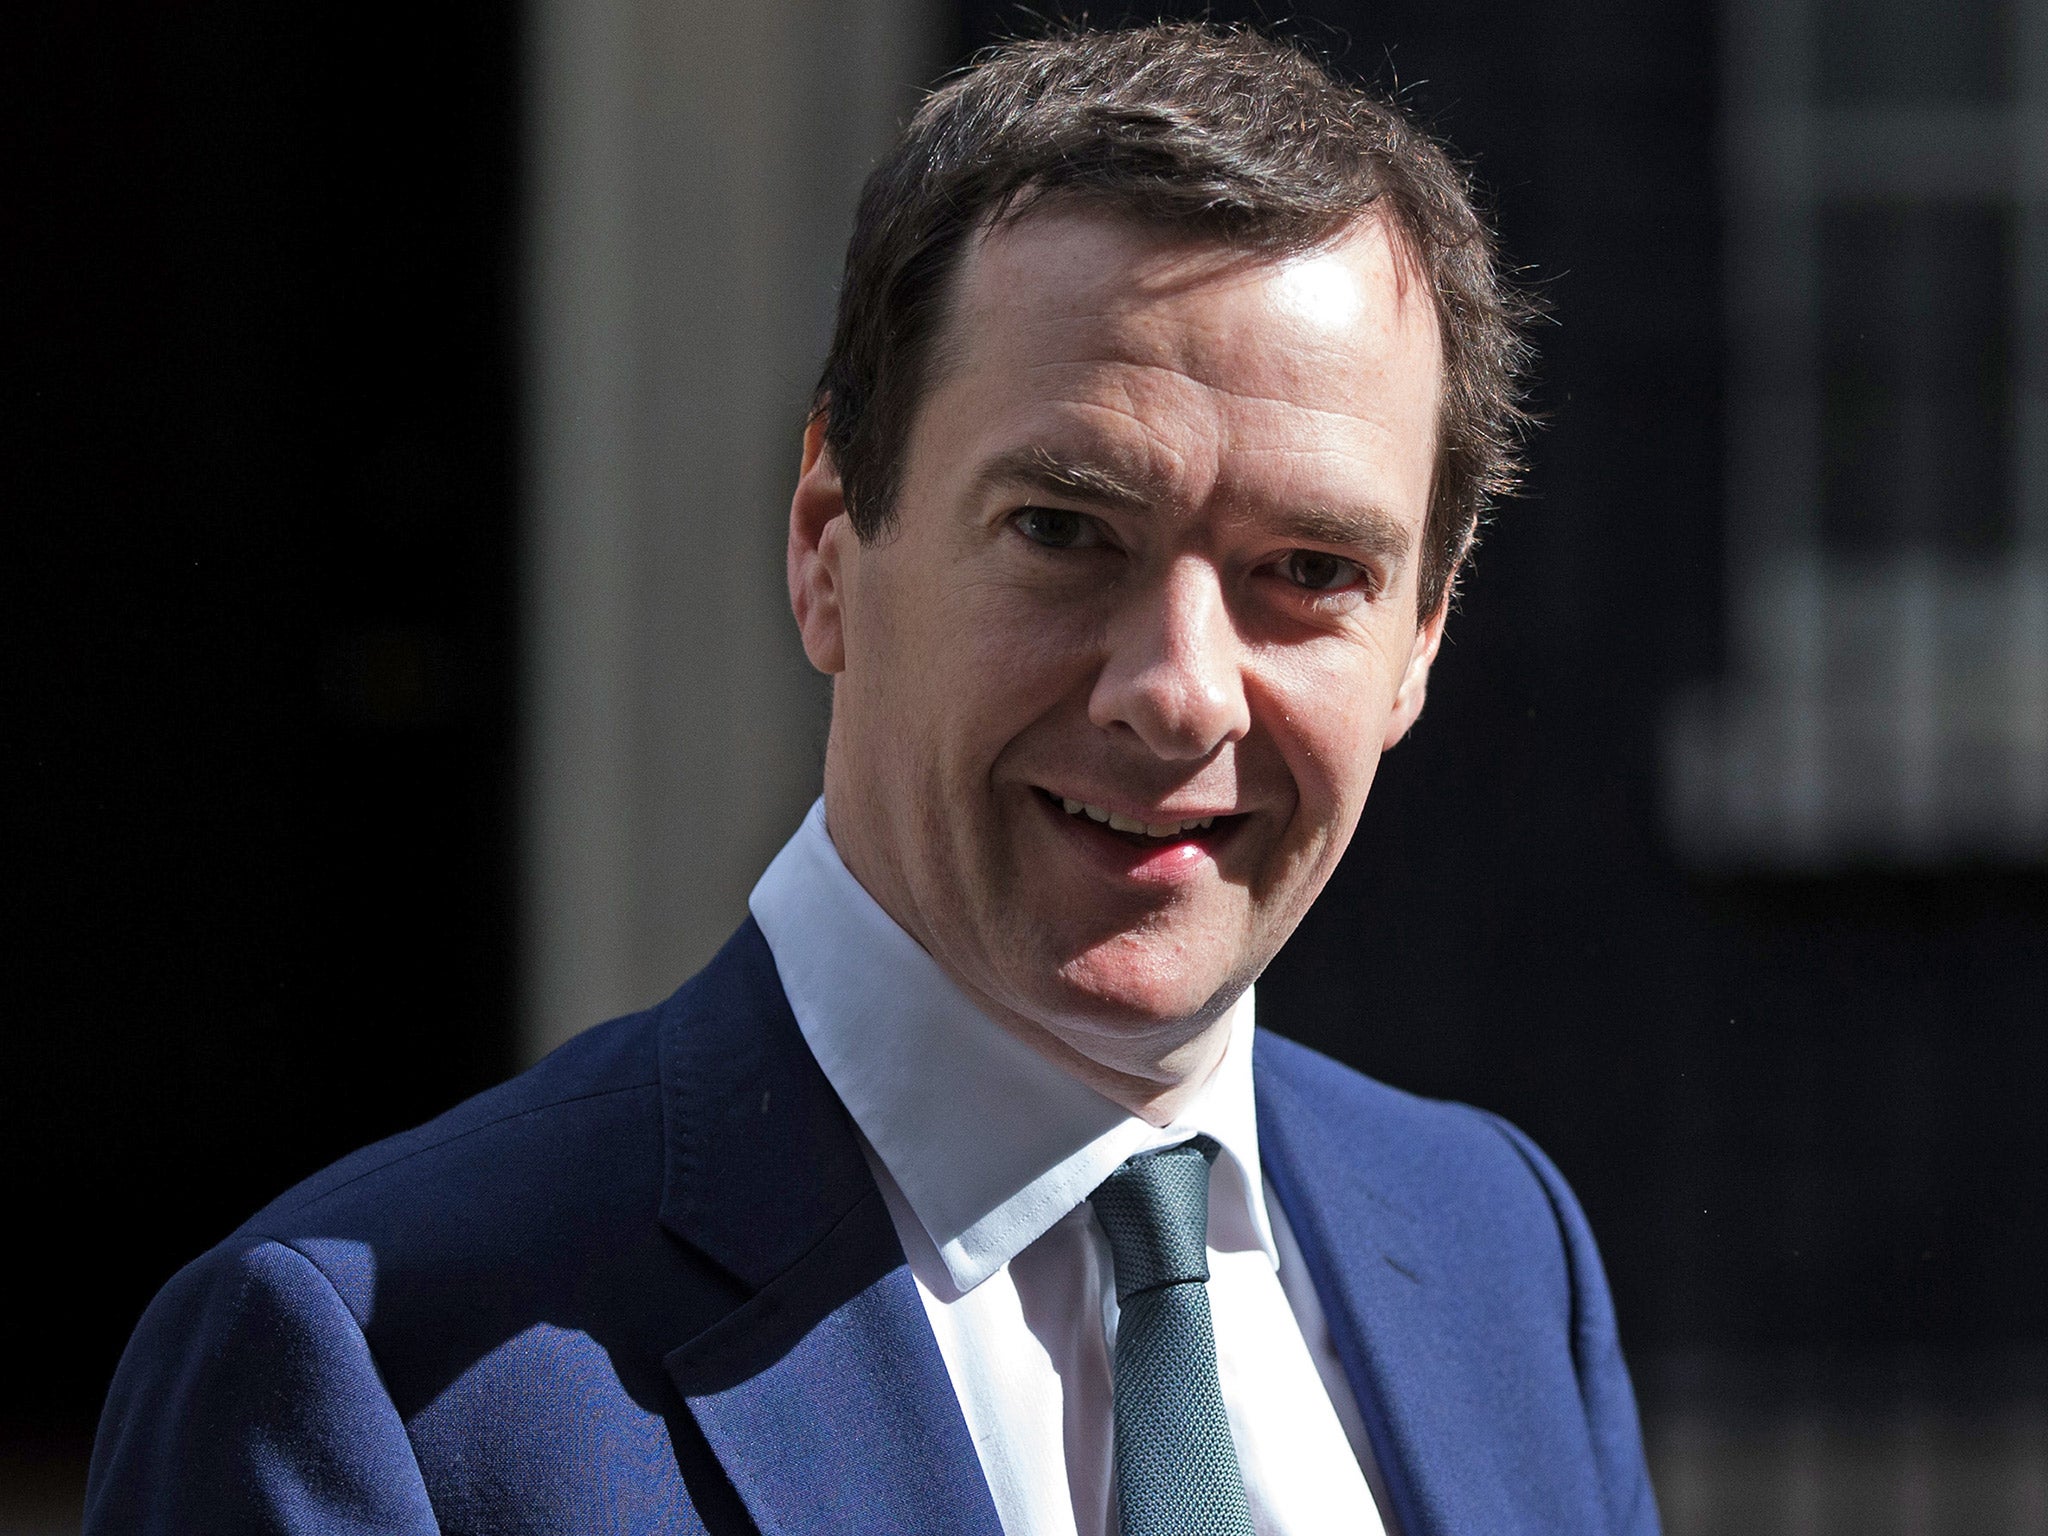 Major banks were dismayed when the Chancellor sharply increased the levy in his Budget